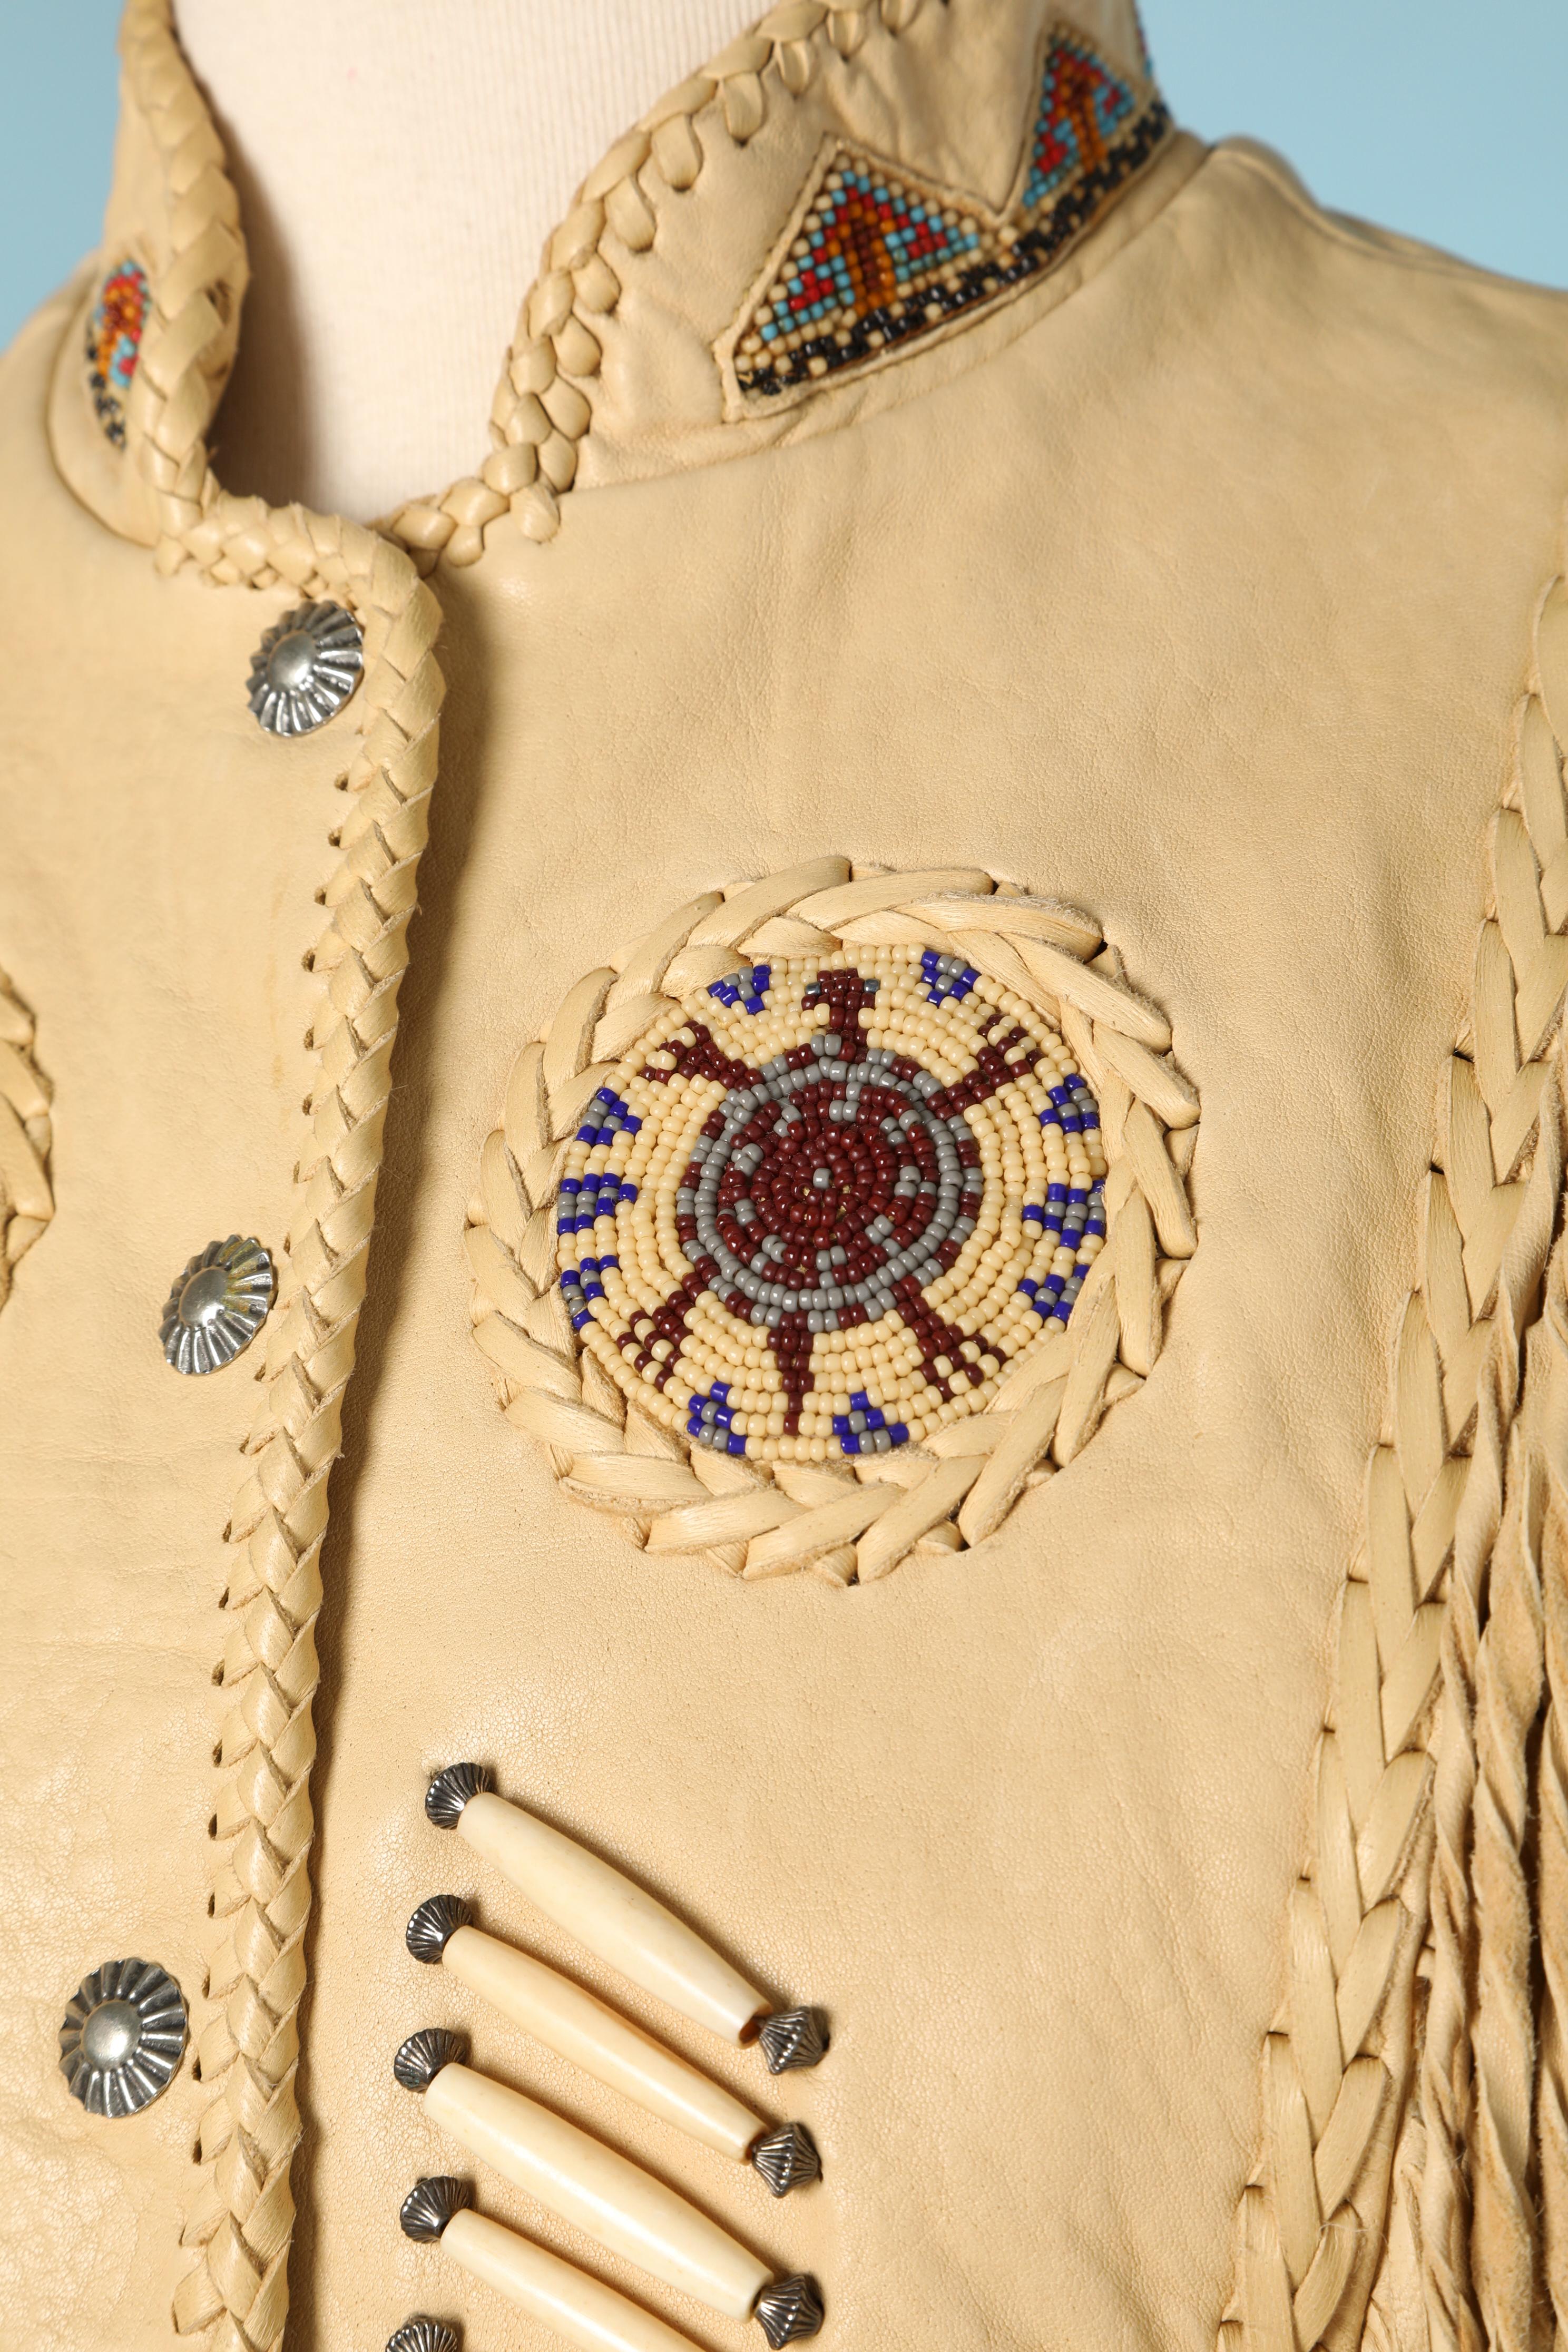 American Indian leather vest with beaded work and fringes.
Acetate lining. Metallic snap
SIZE 6